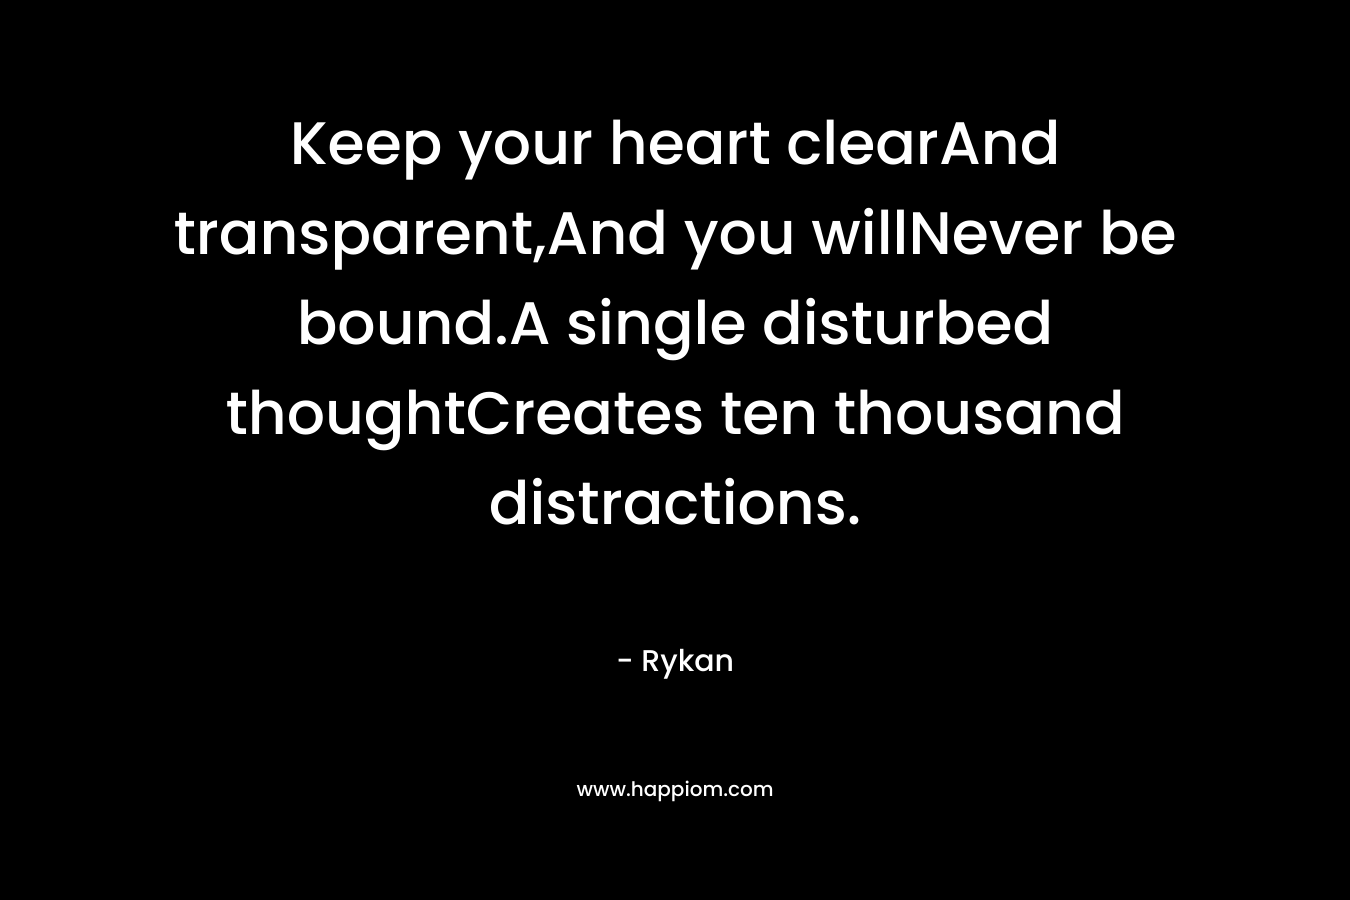 Keep your heart clearAnd transparent,And you willNever be bound.A single disturbed thoughtCreates ten thousand distractions. – Rykan